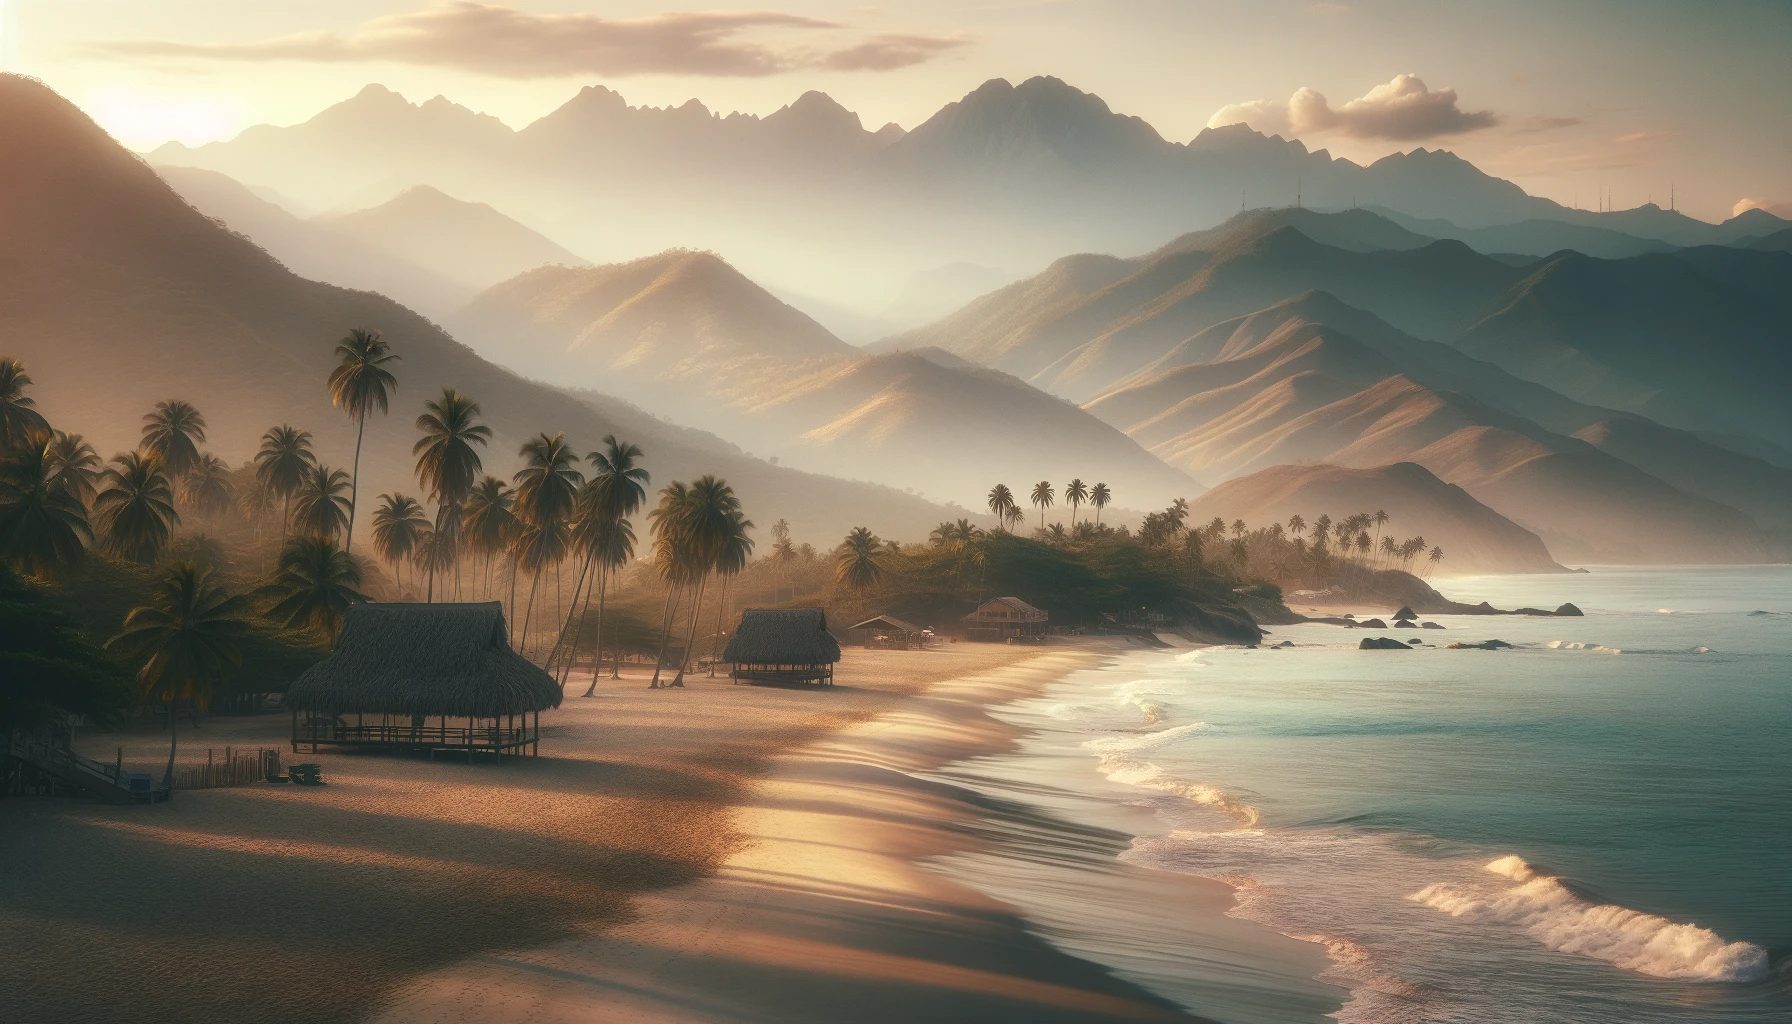 Tropical beach sunset with mountains and palm trees.